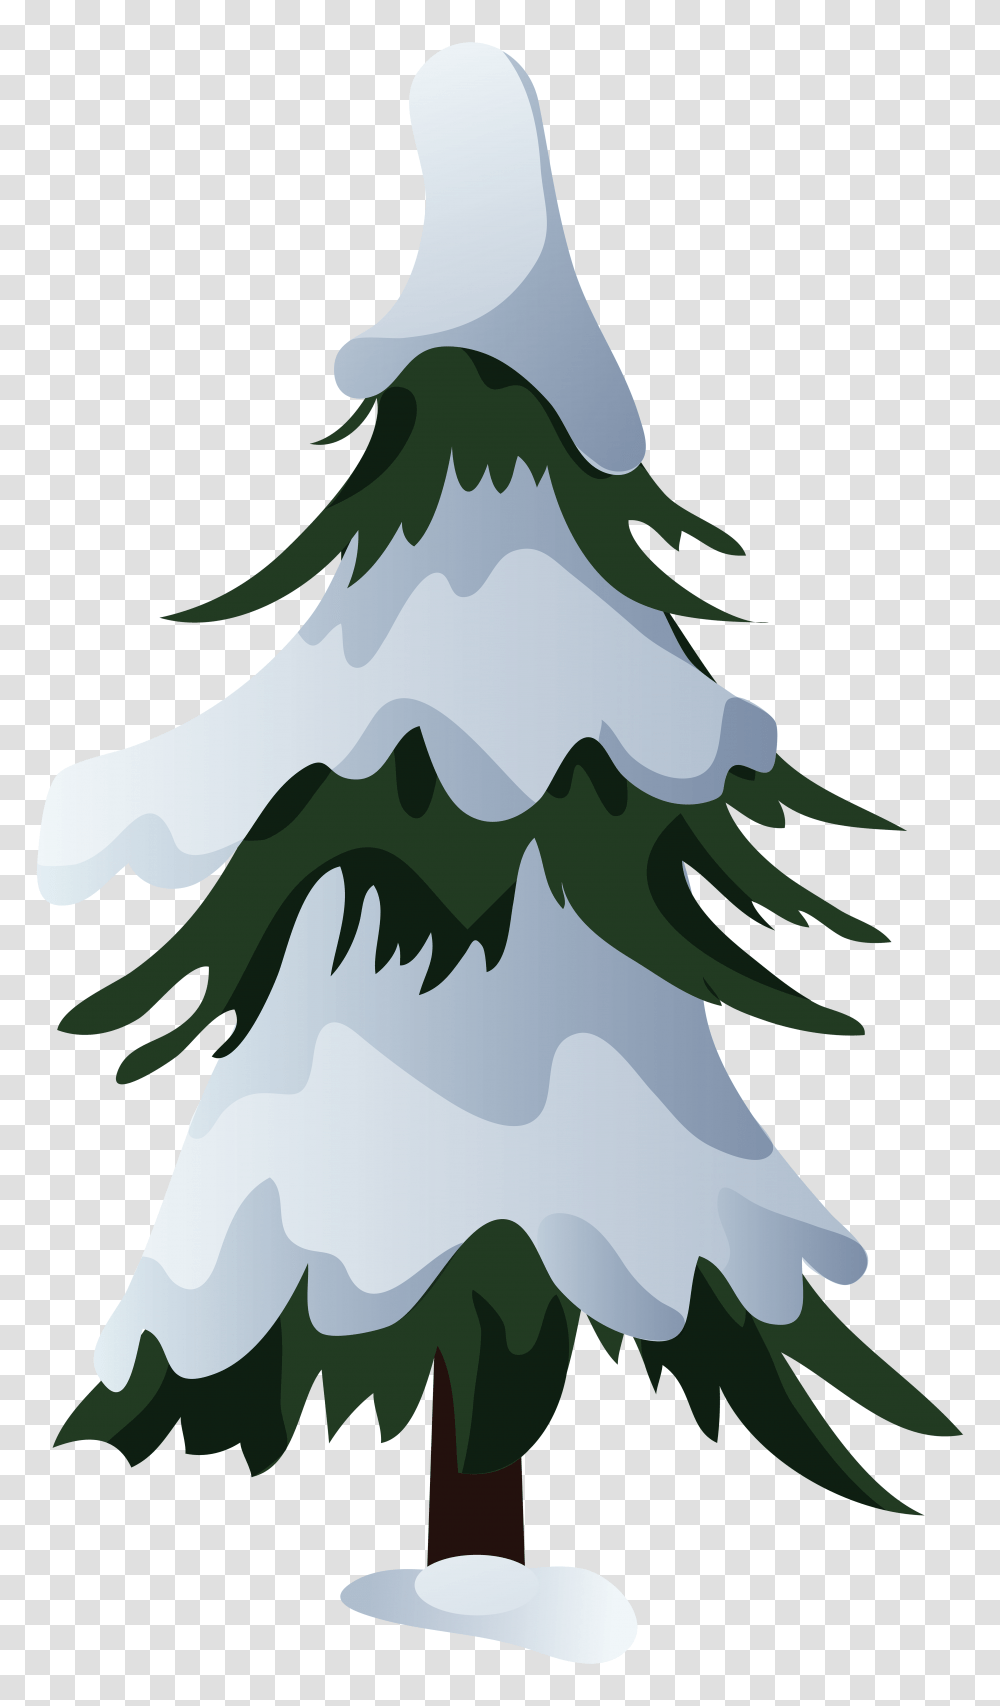 Snowy Pine Tree Clipart Free Download Snowy Pine Tree, Military, Military Uniform, Plant, Camouflage Transparent Png